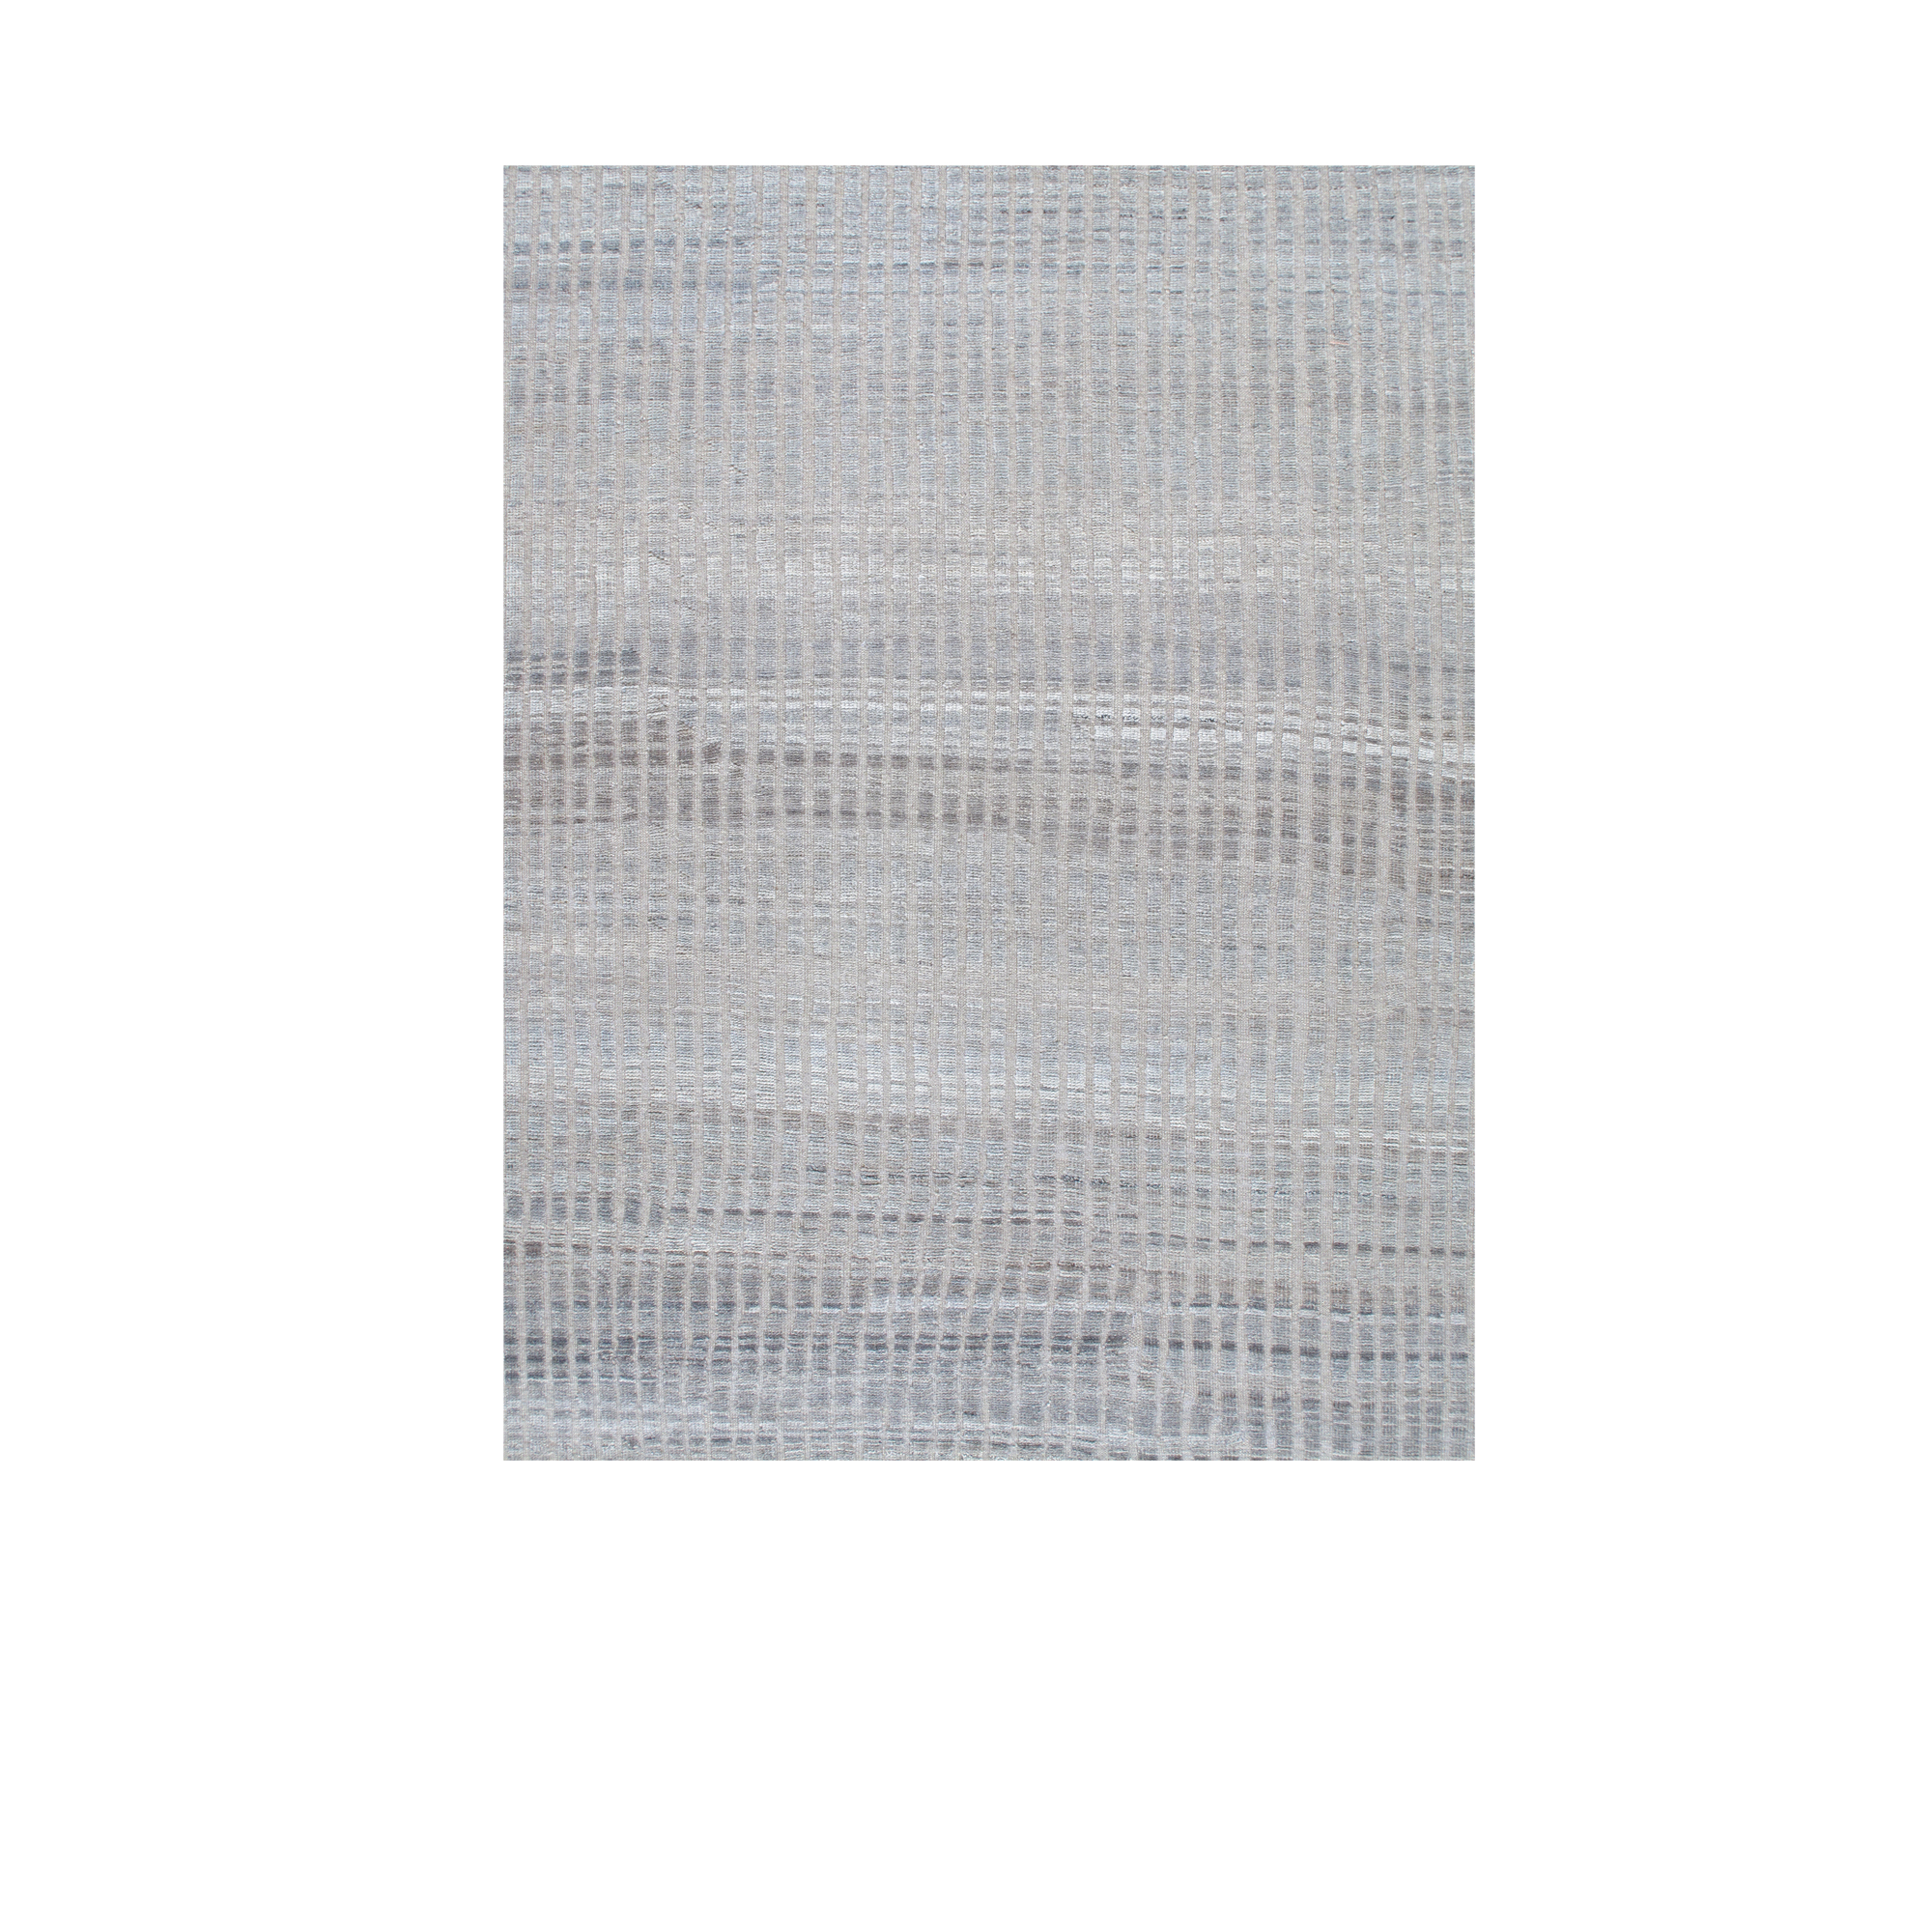 African rug that is hand-knotted from naturally dyed wool with subtle silk accents. 